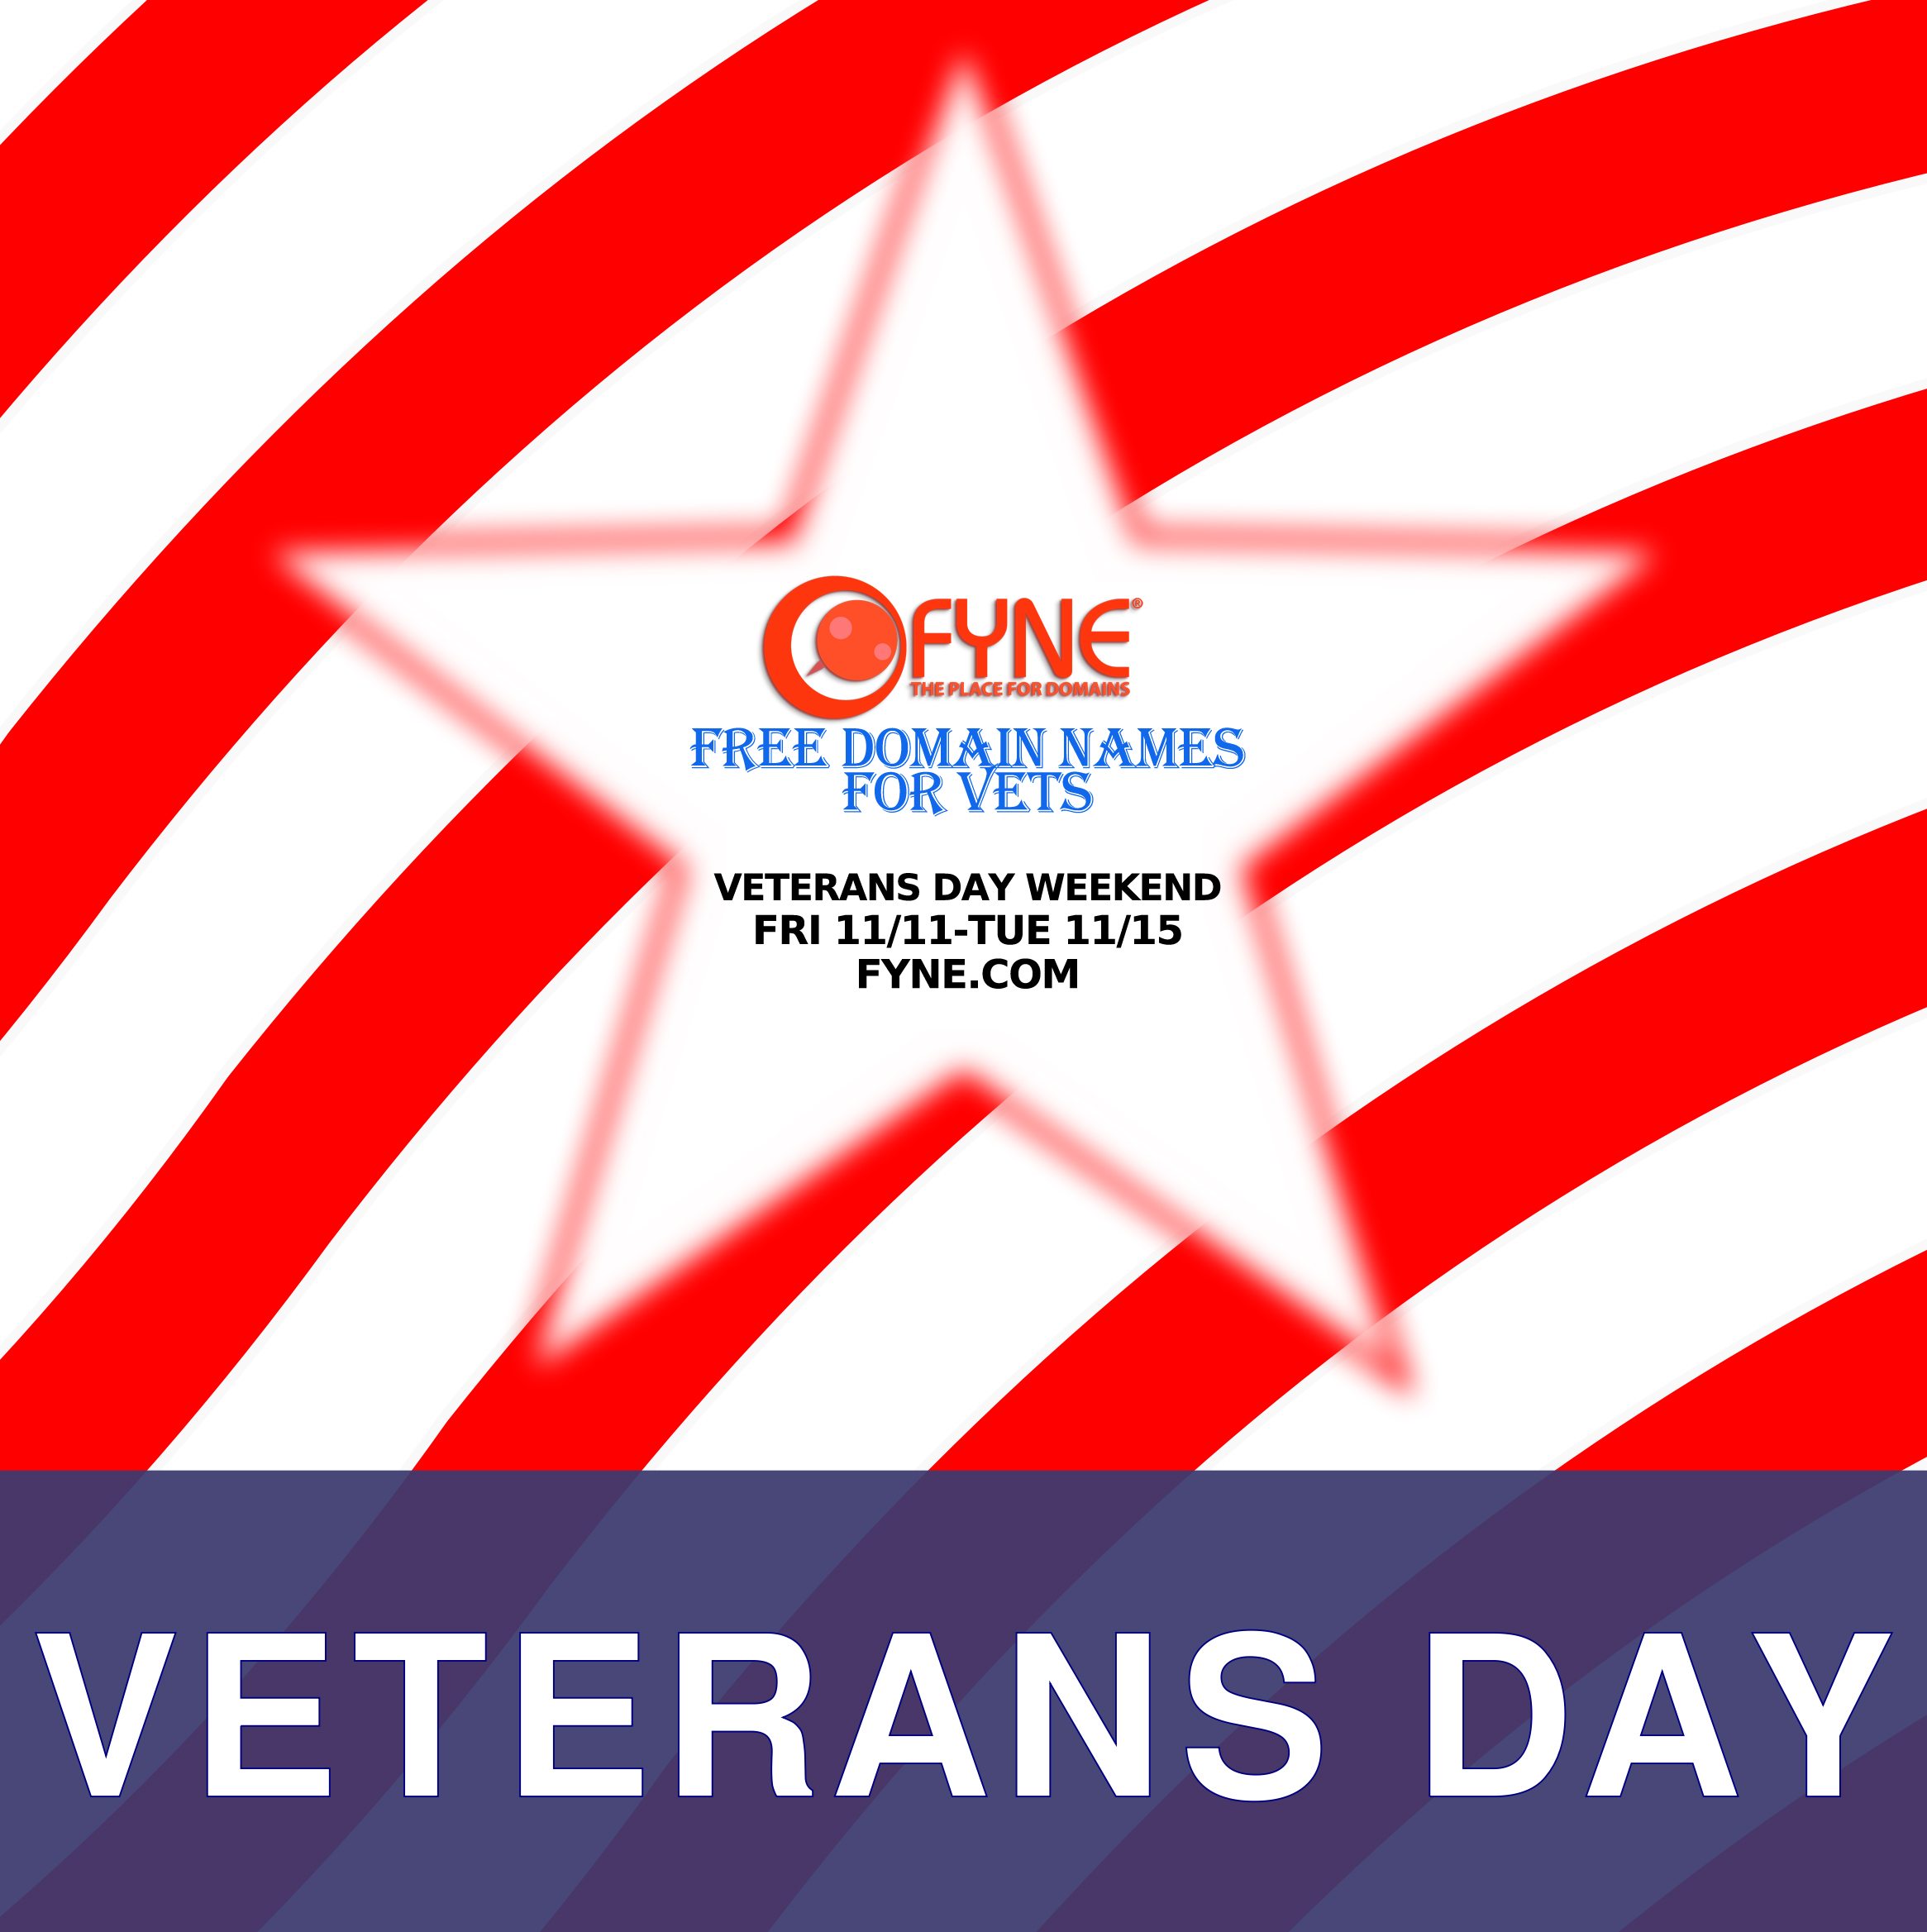 FYNE - Free Domain Names for Vets - Extended Veterans Day Weekend